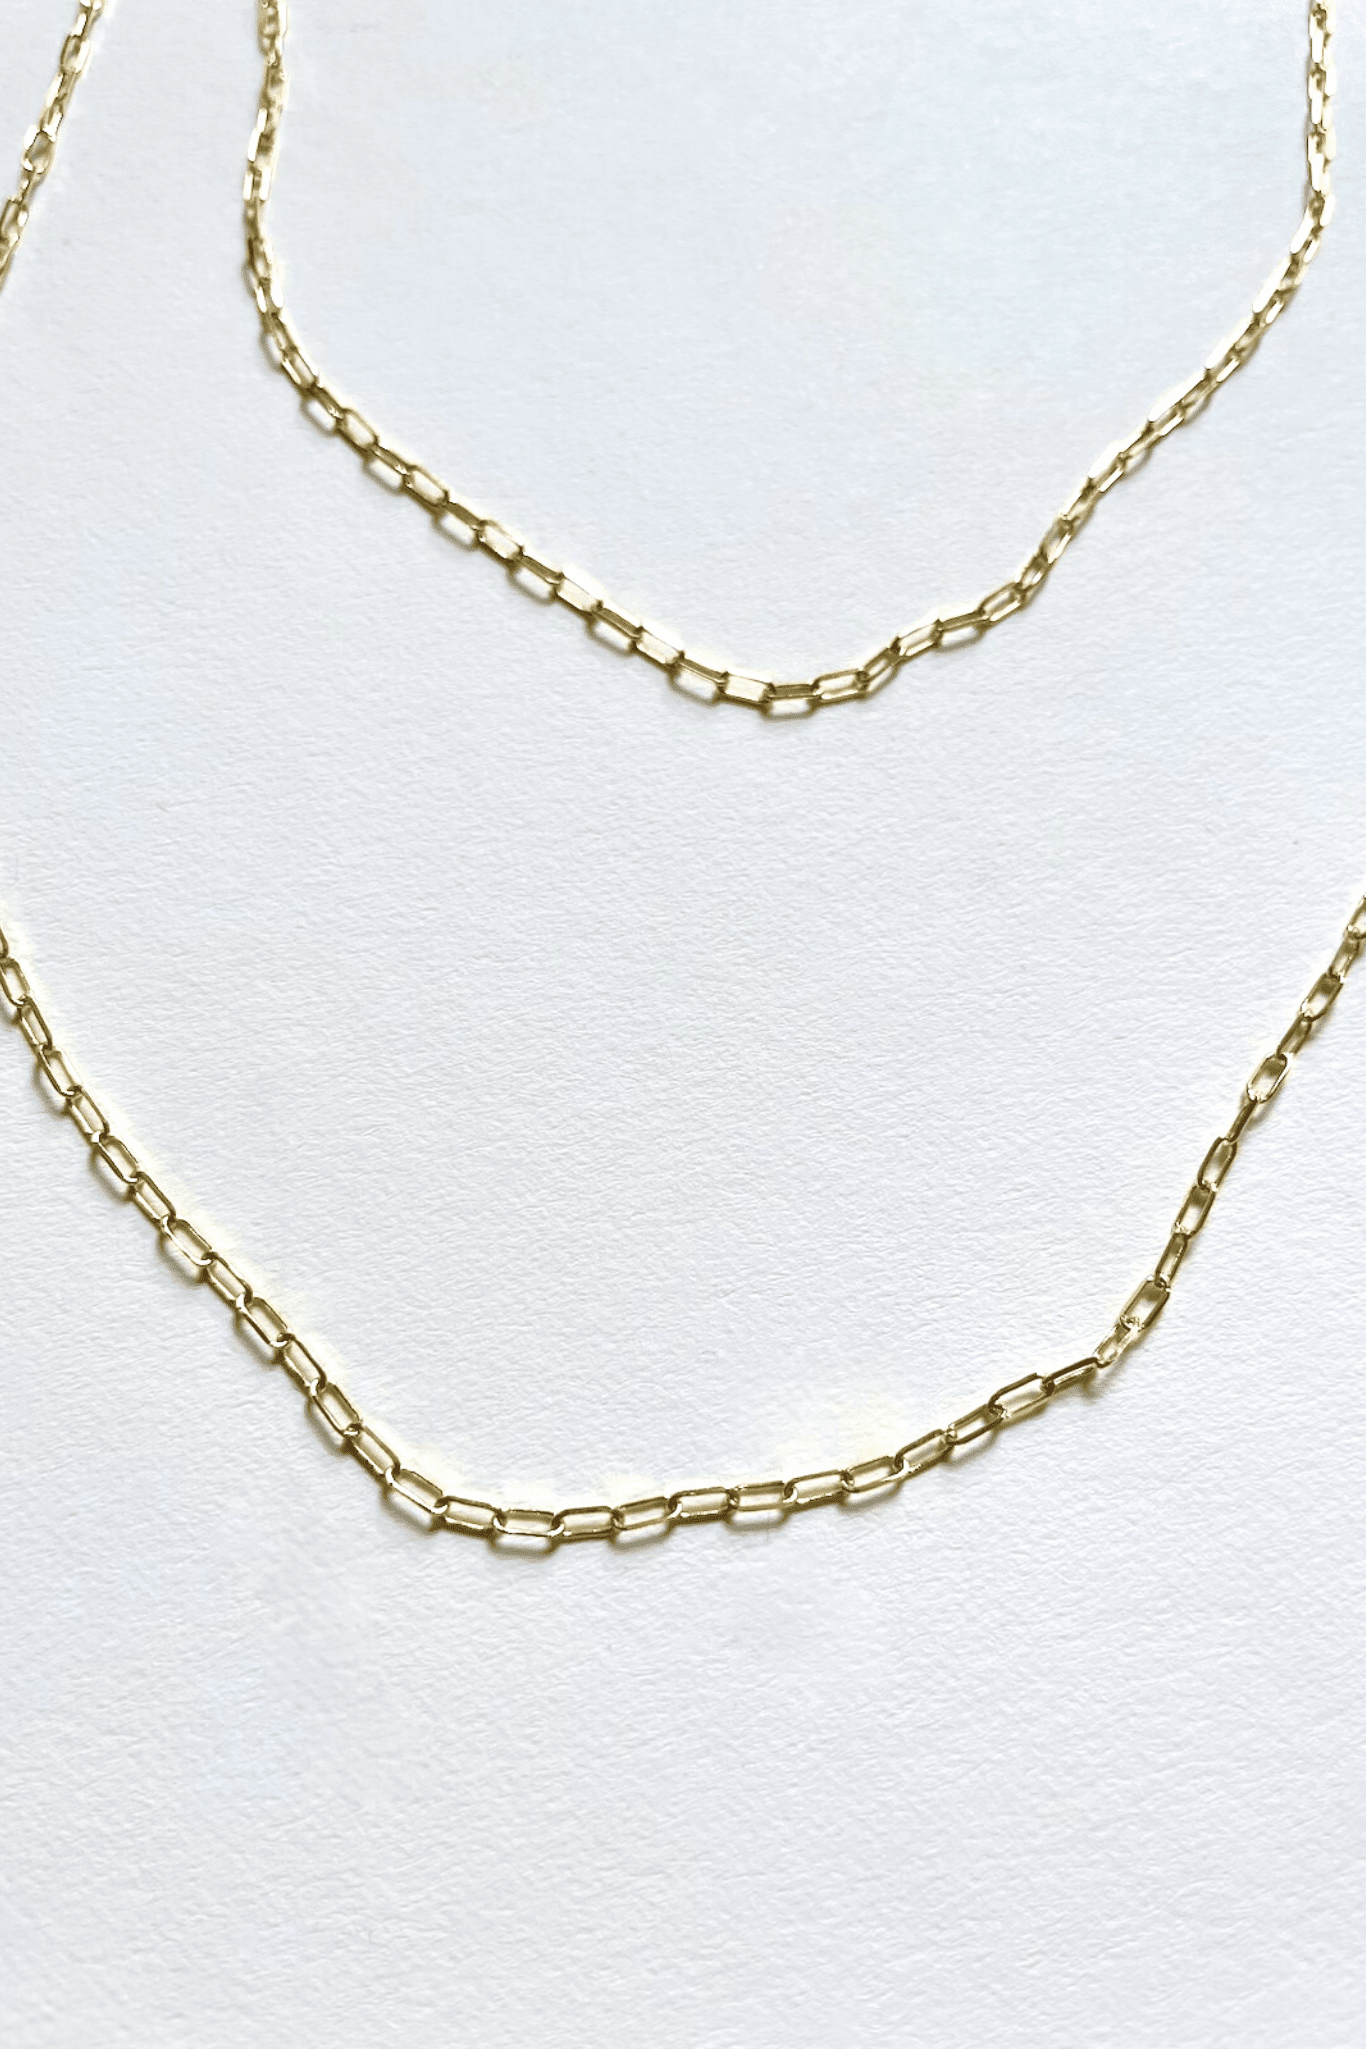 Carrie Hoffman - 14K Mini Paperclip Necklace